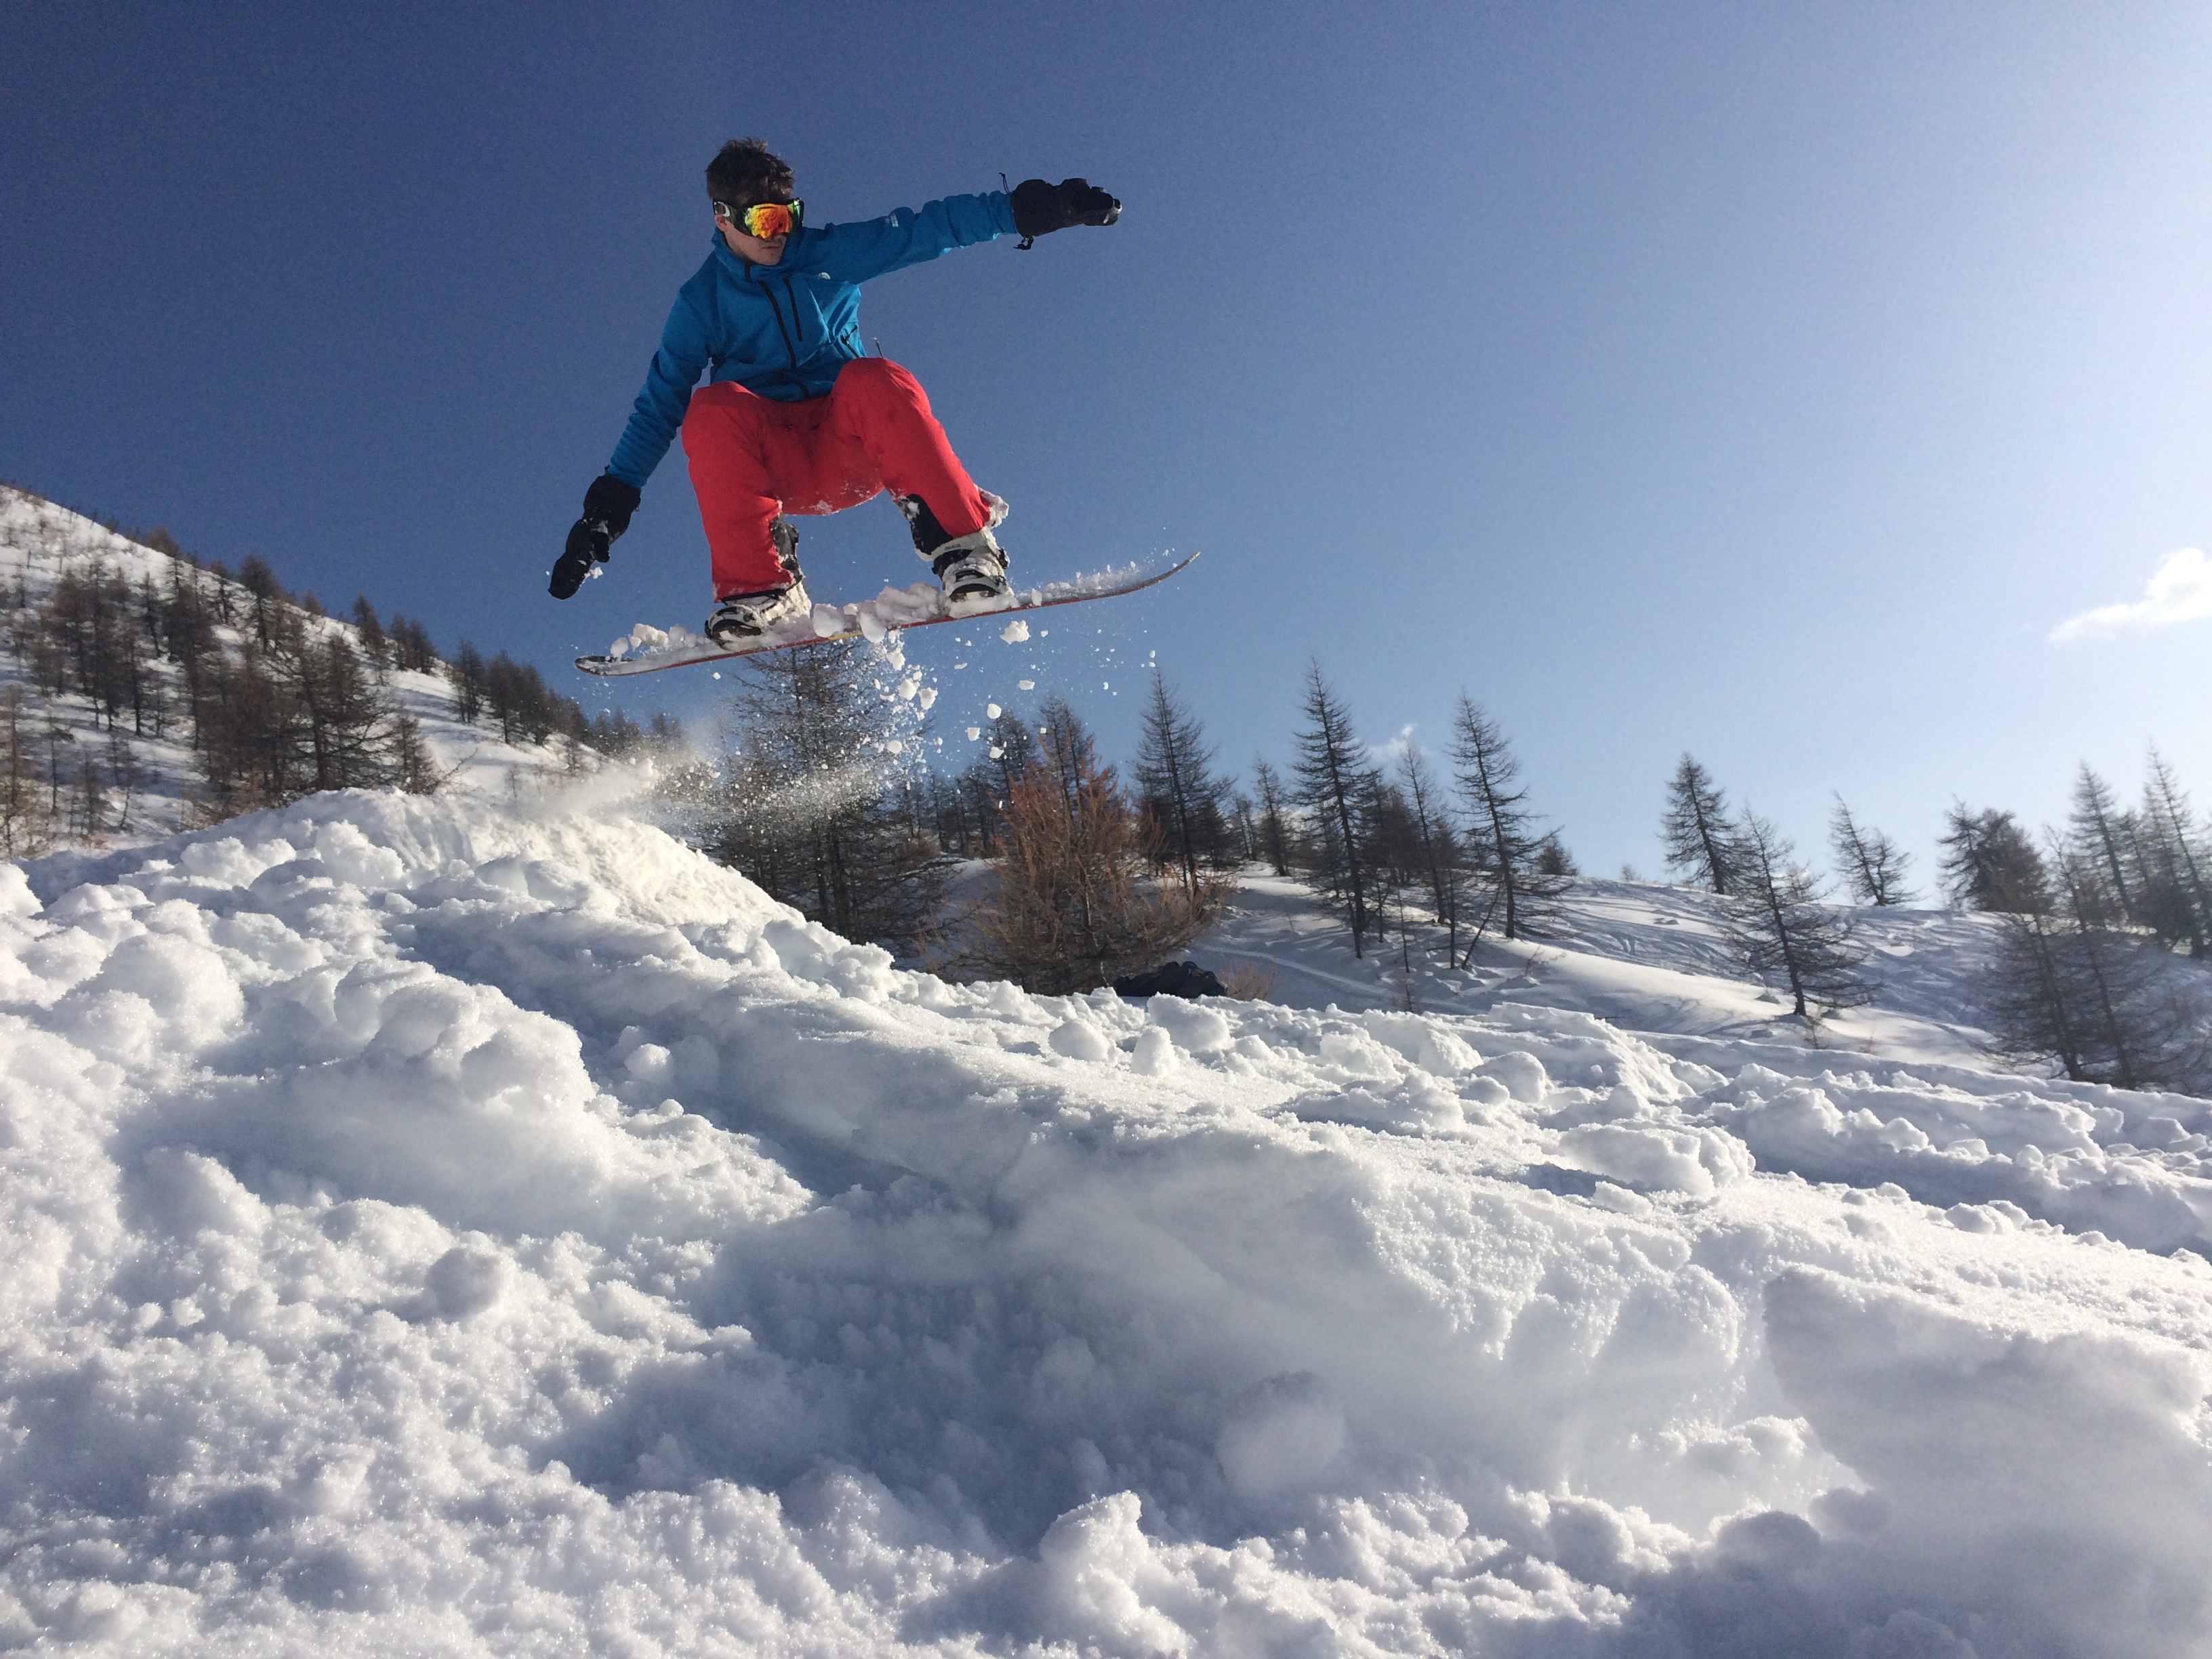 Fun off-piste and snowboarding jumps